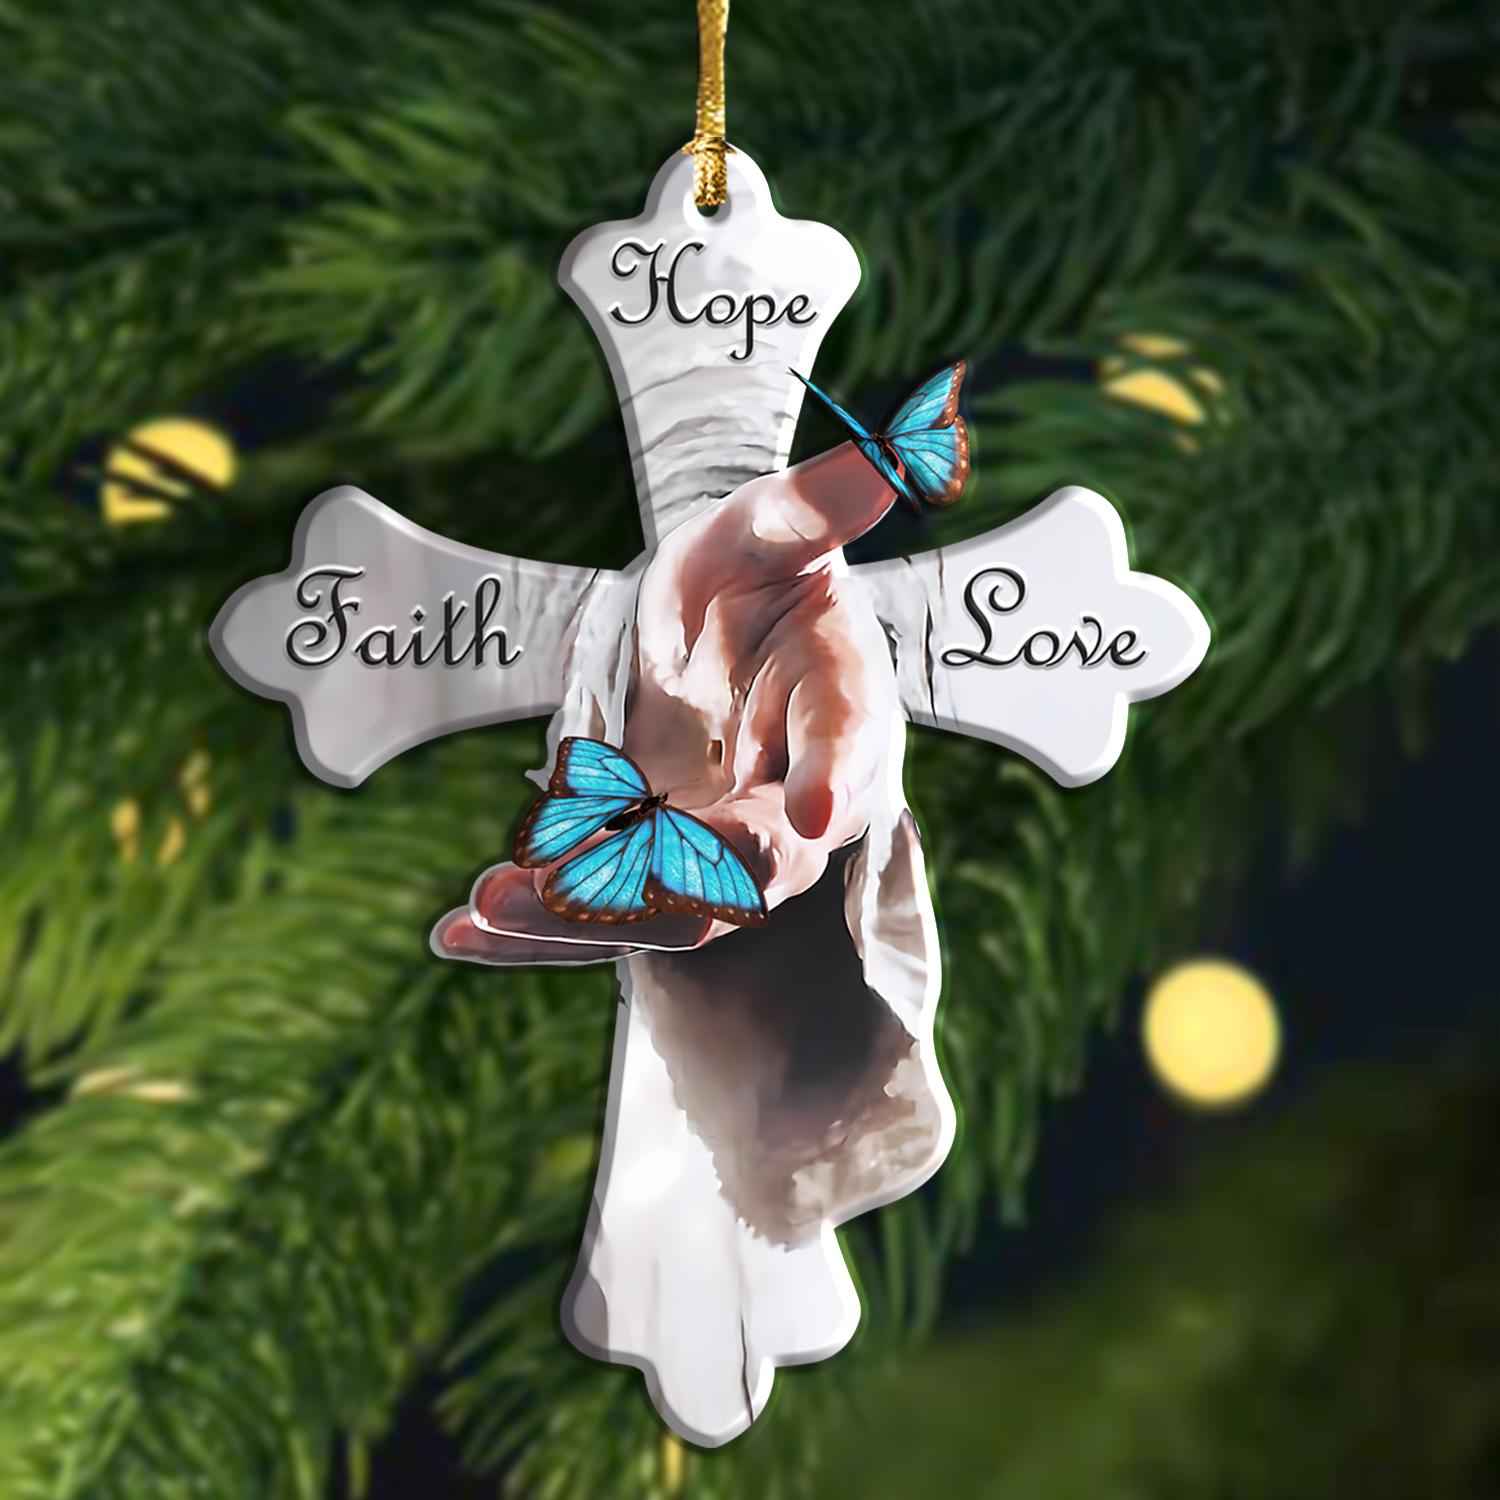 Give Me Your Hand Christian Cross Ornament Gift Christmas Ornament Car Hanging